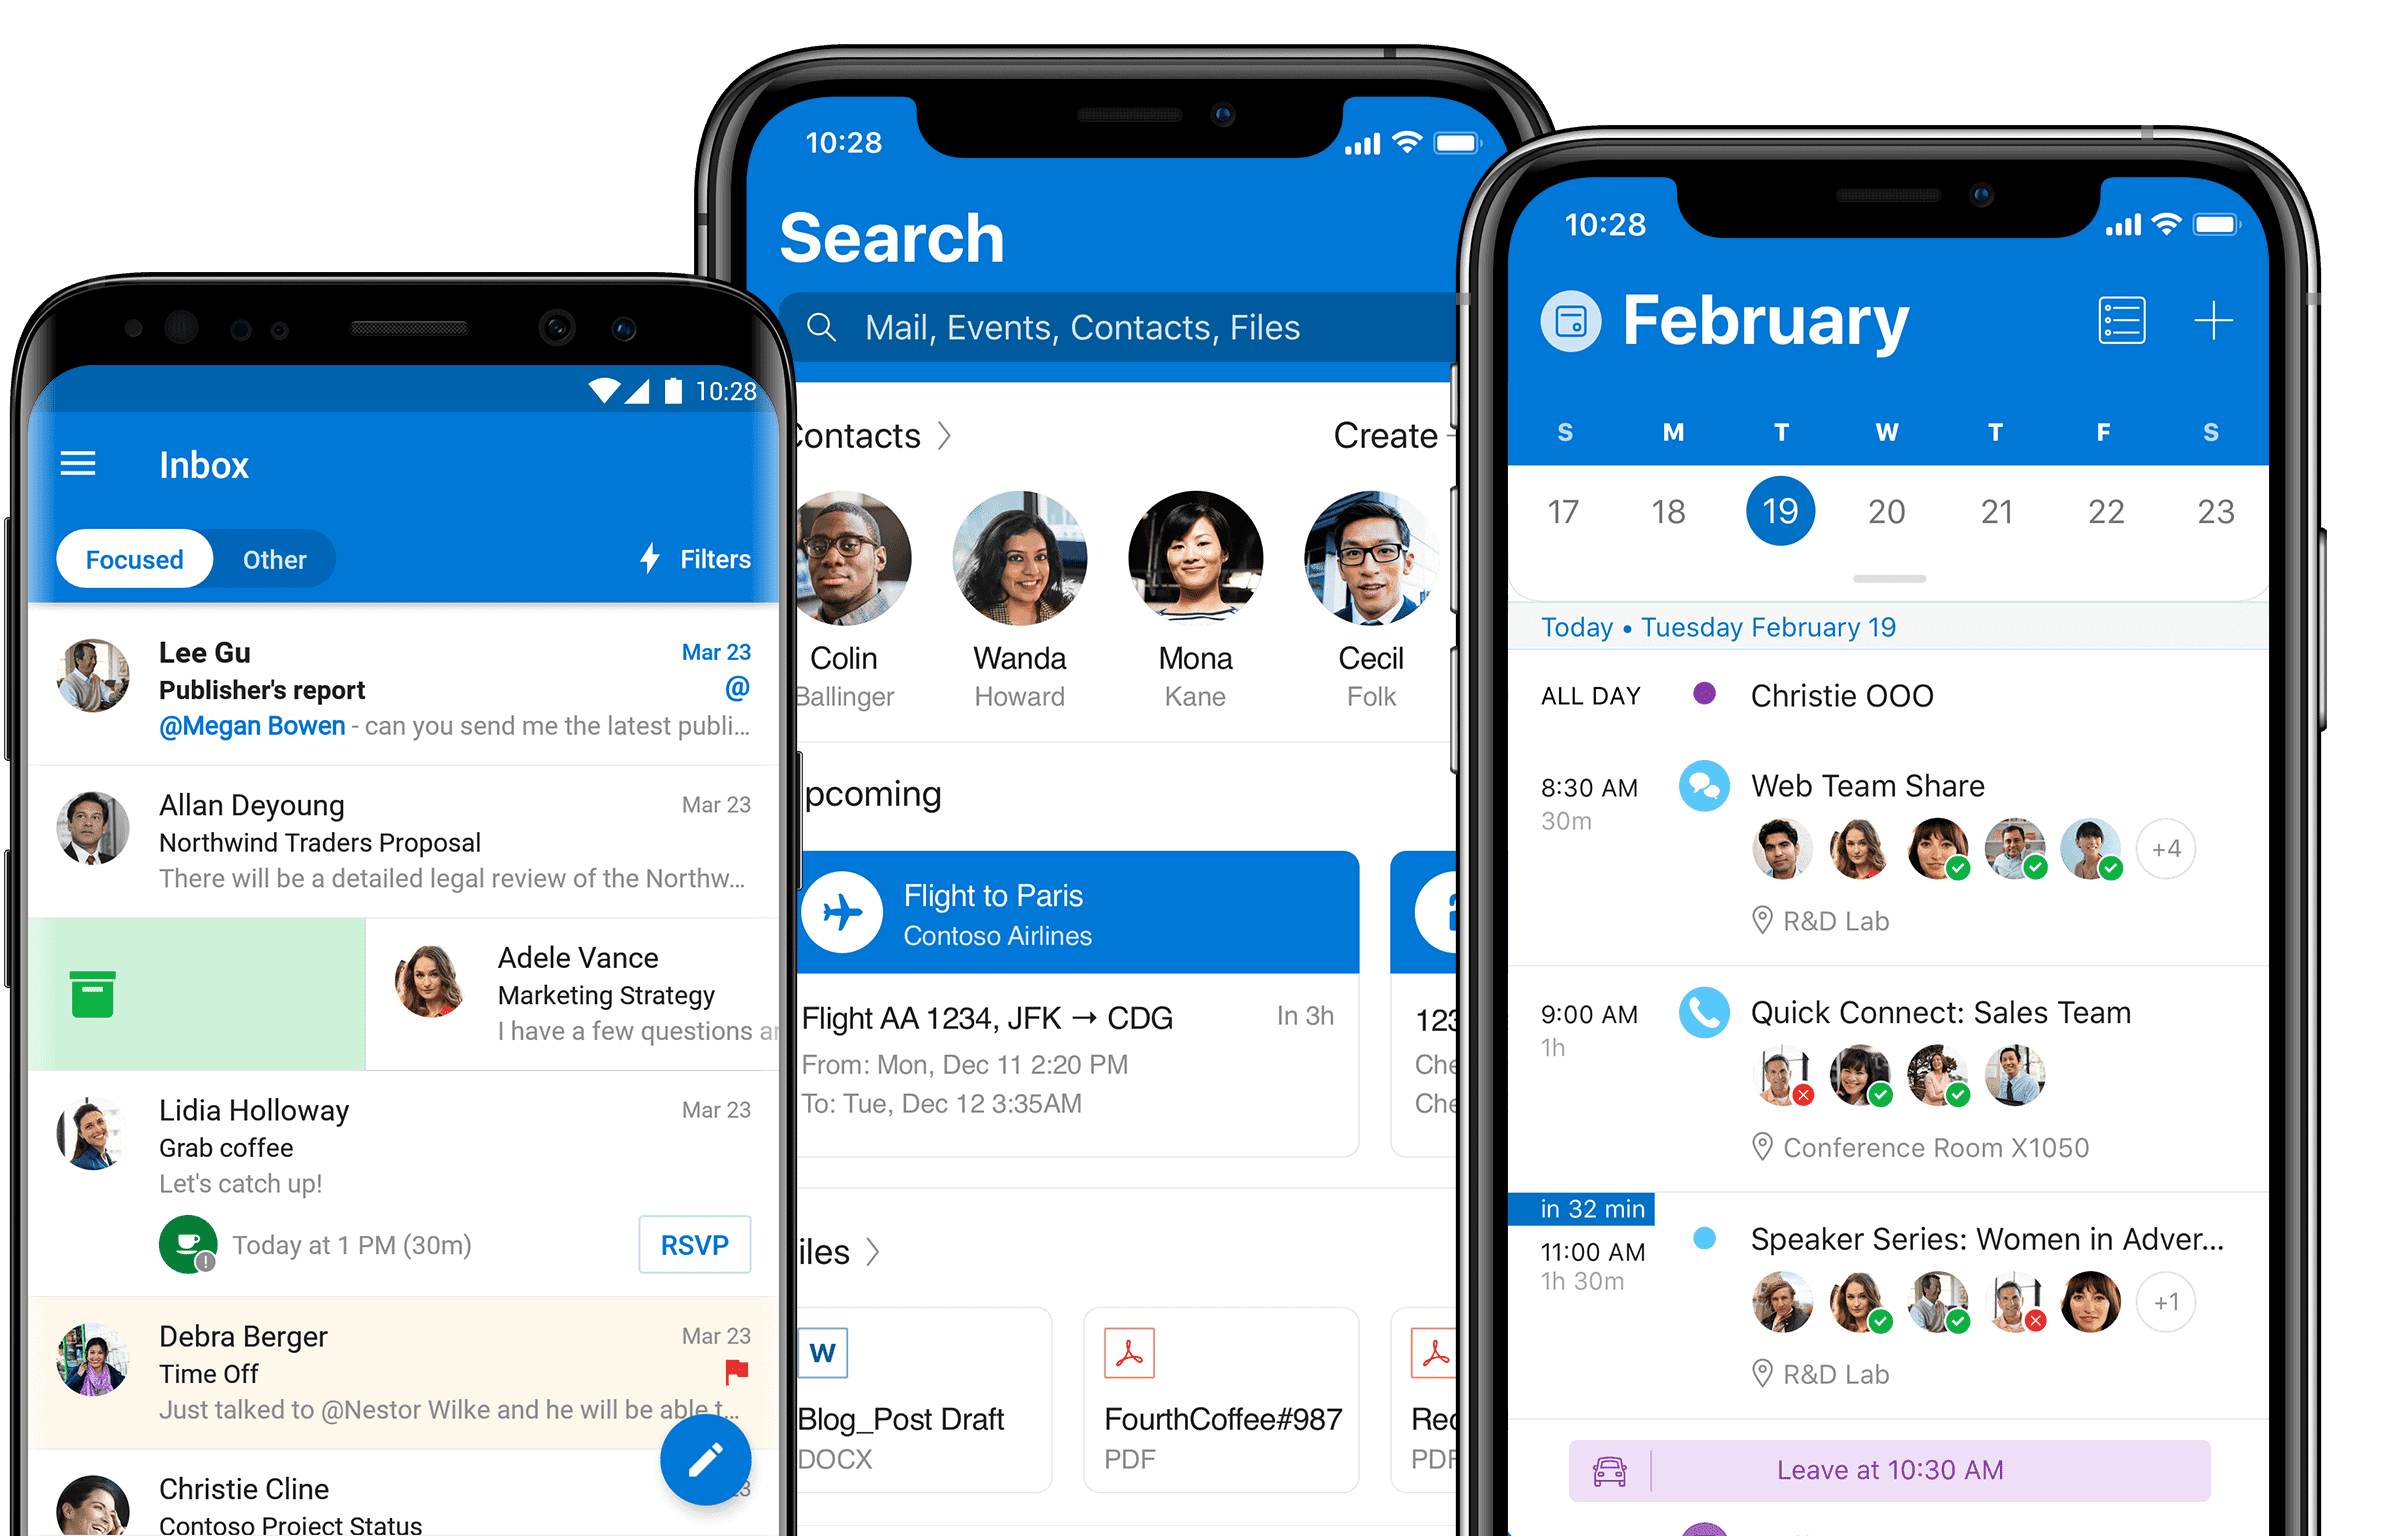 Microsoft Outlook mobile users will soon get a bunch of new features